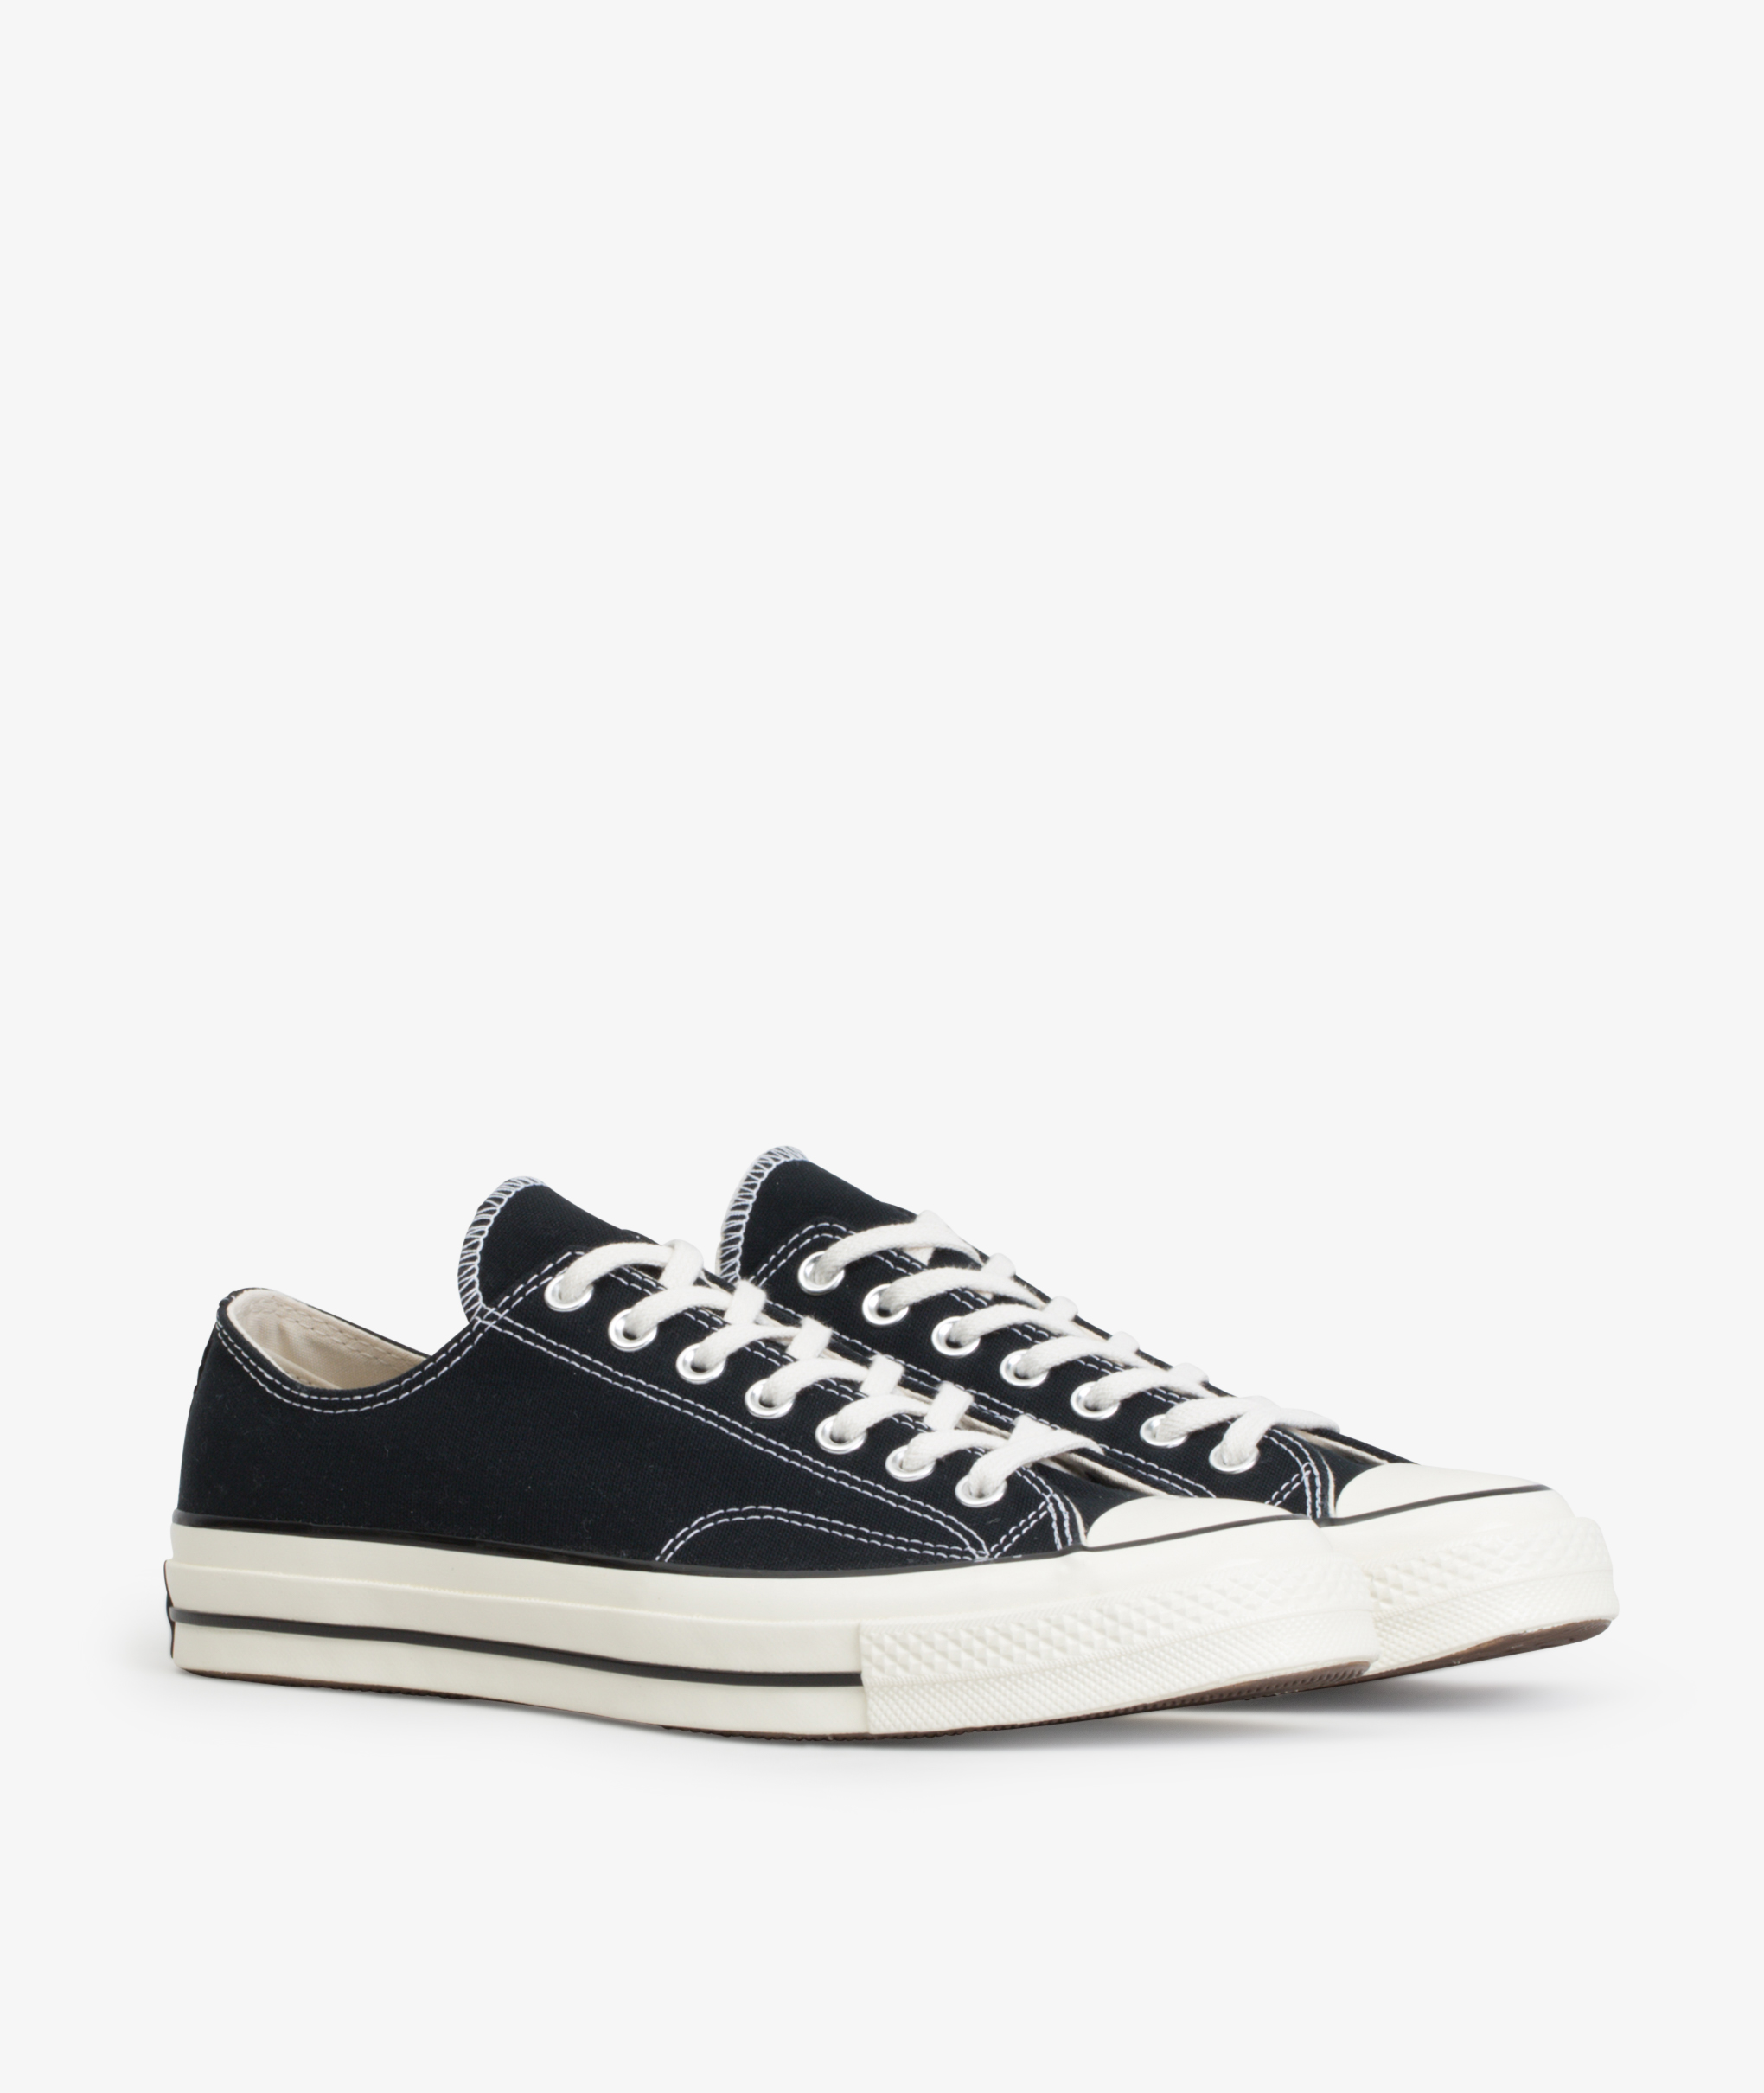 Norse Store - Converse All Star 70 OX